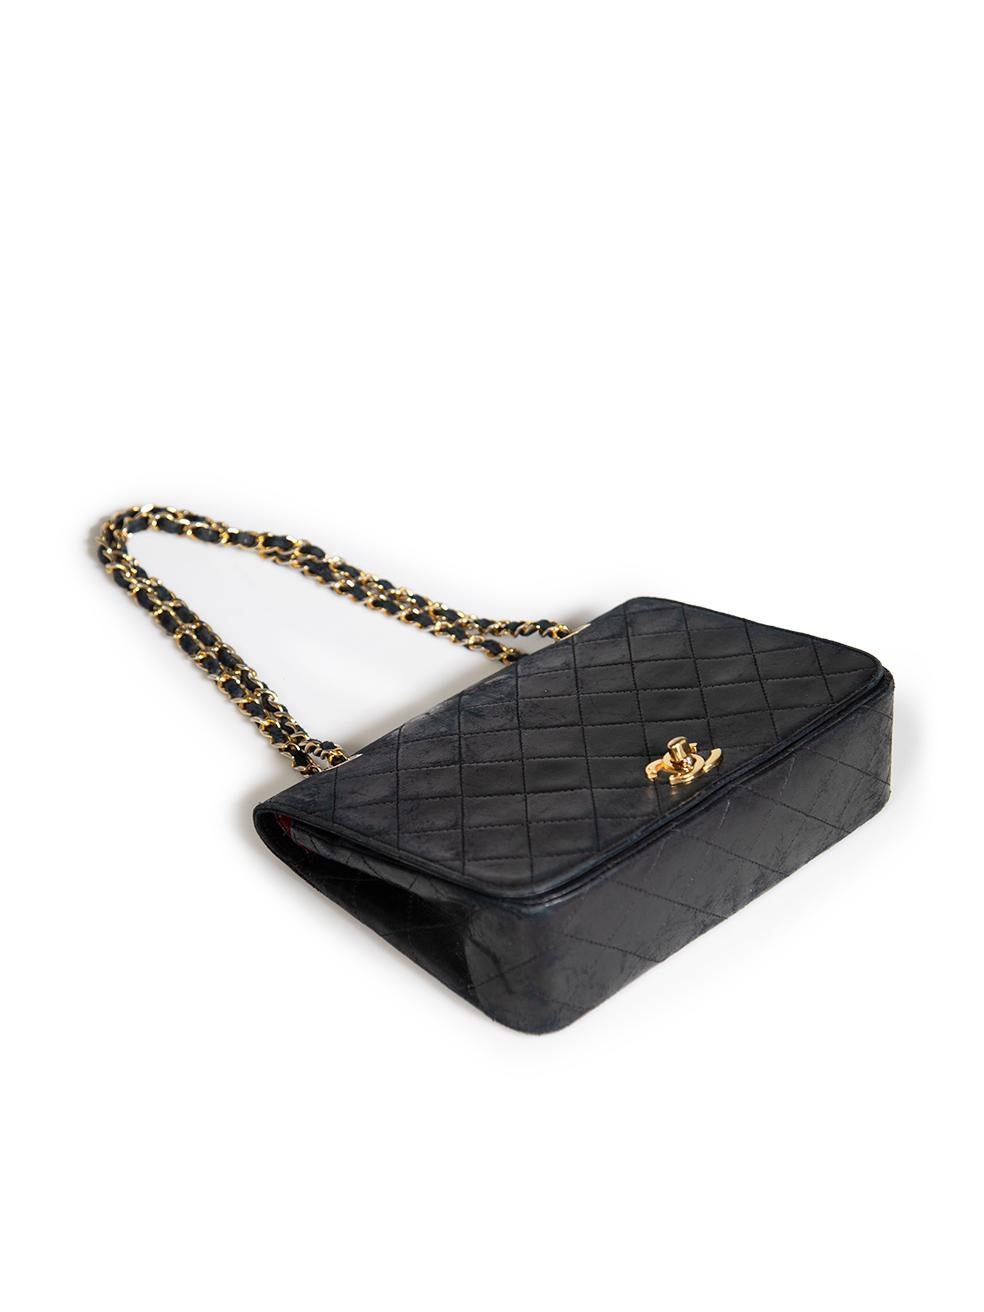 Women's Chanel Vintage Black Lambskin Quilted Flap Bag For Sale